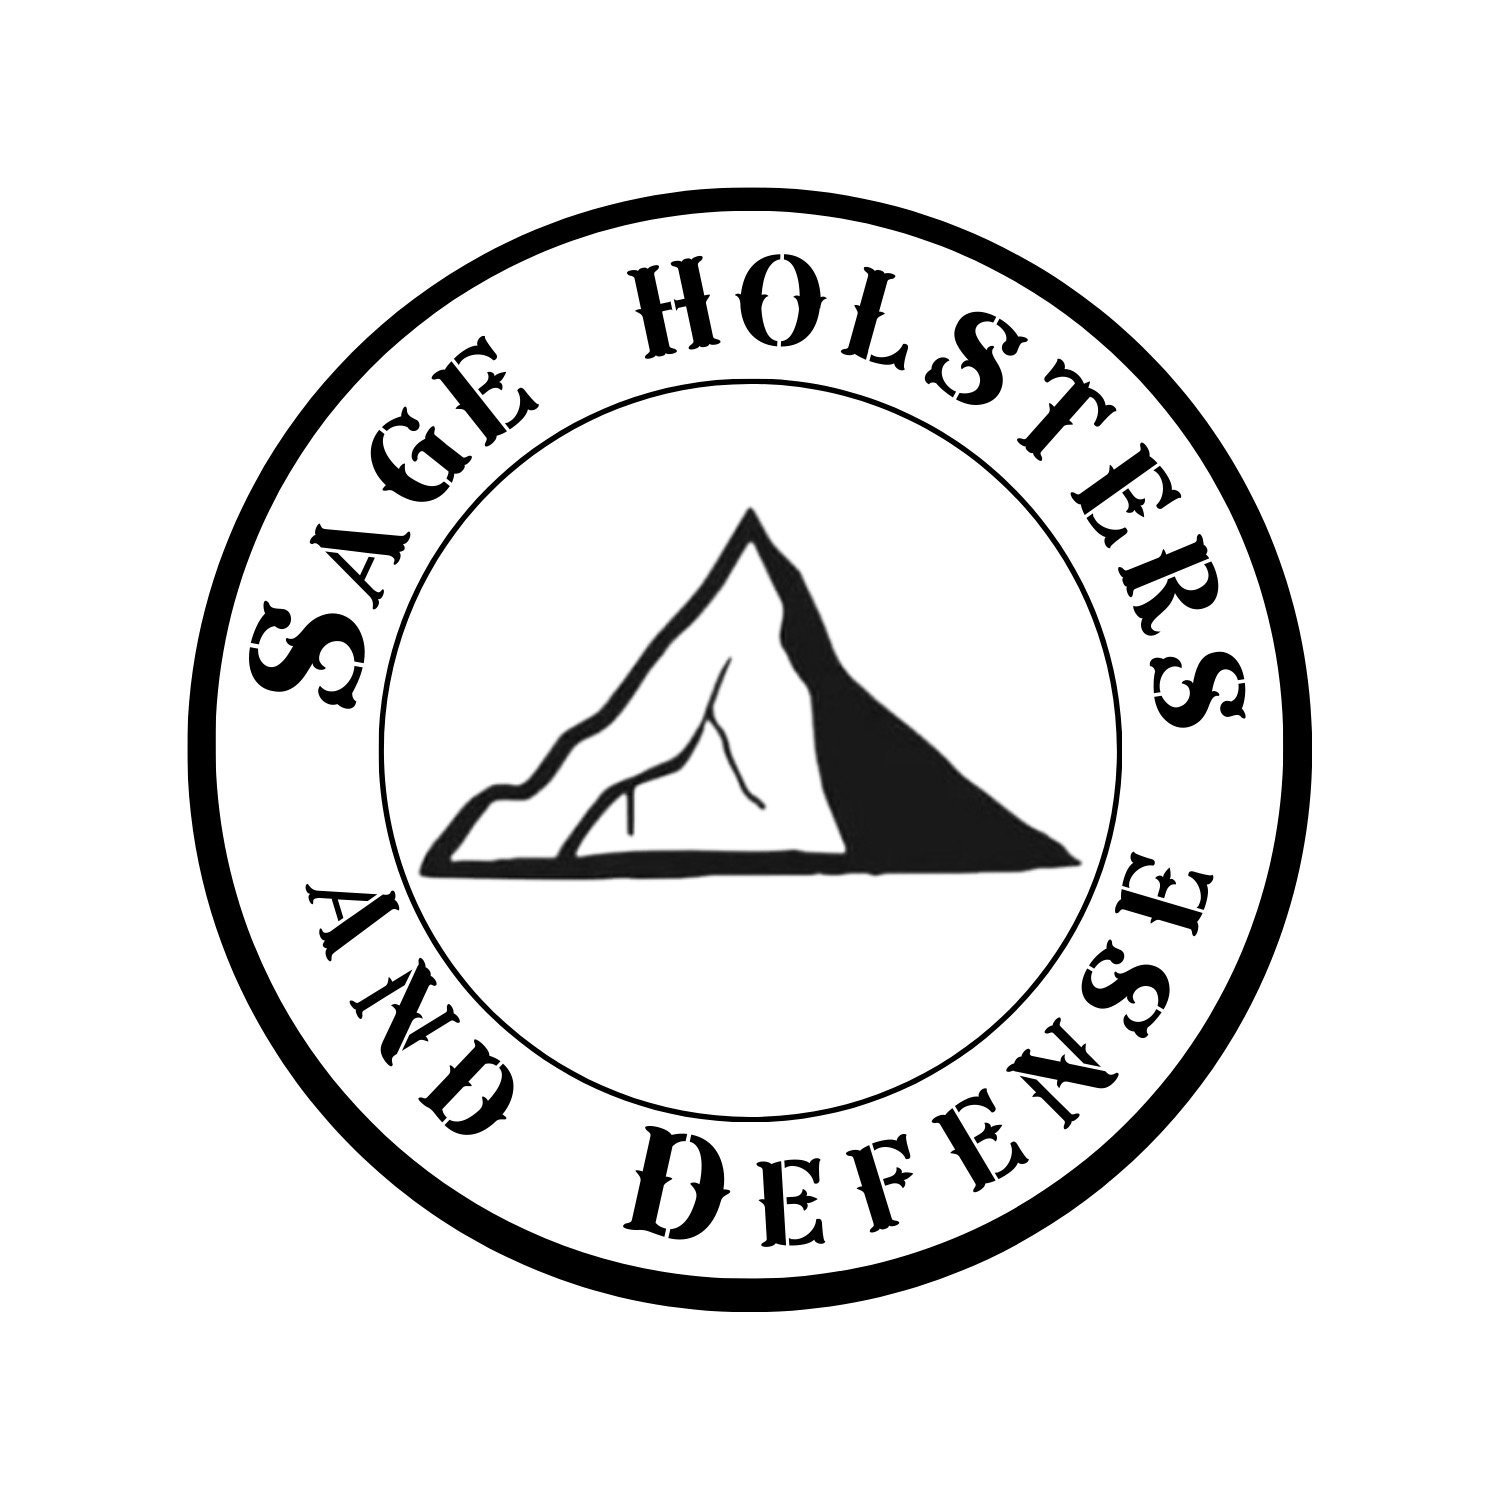 Sage Holsters and Defense